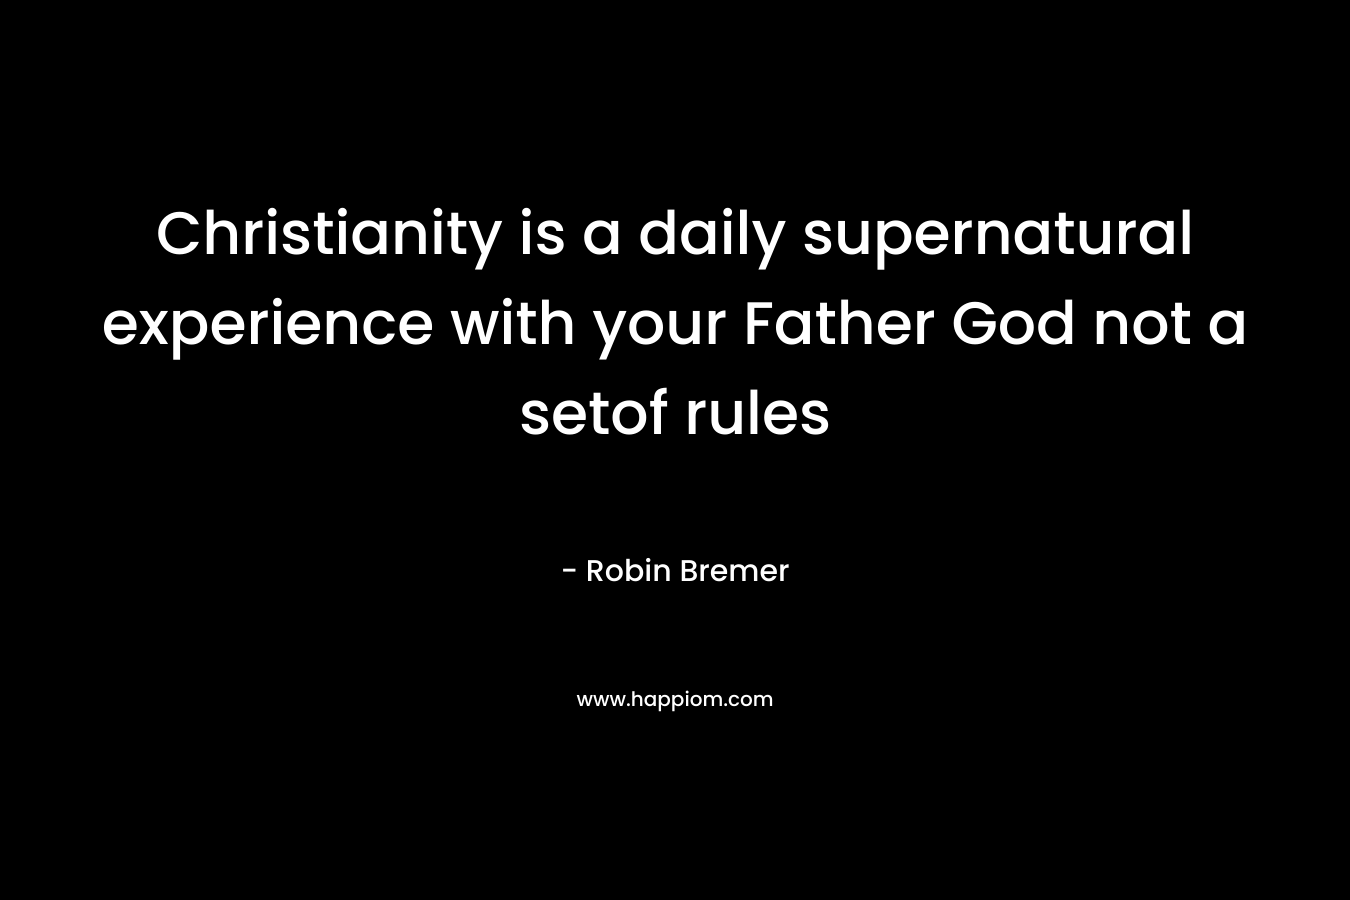 Christianity is a daily supernatural experience with your Father God not a setof rules